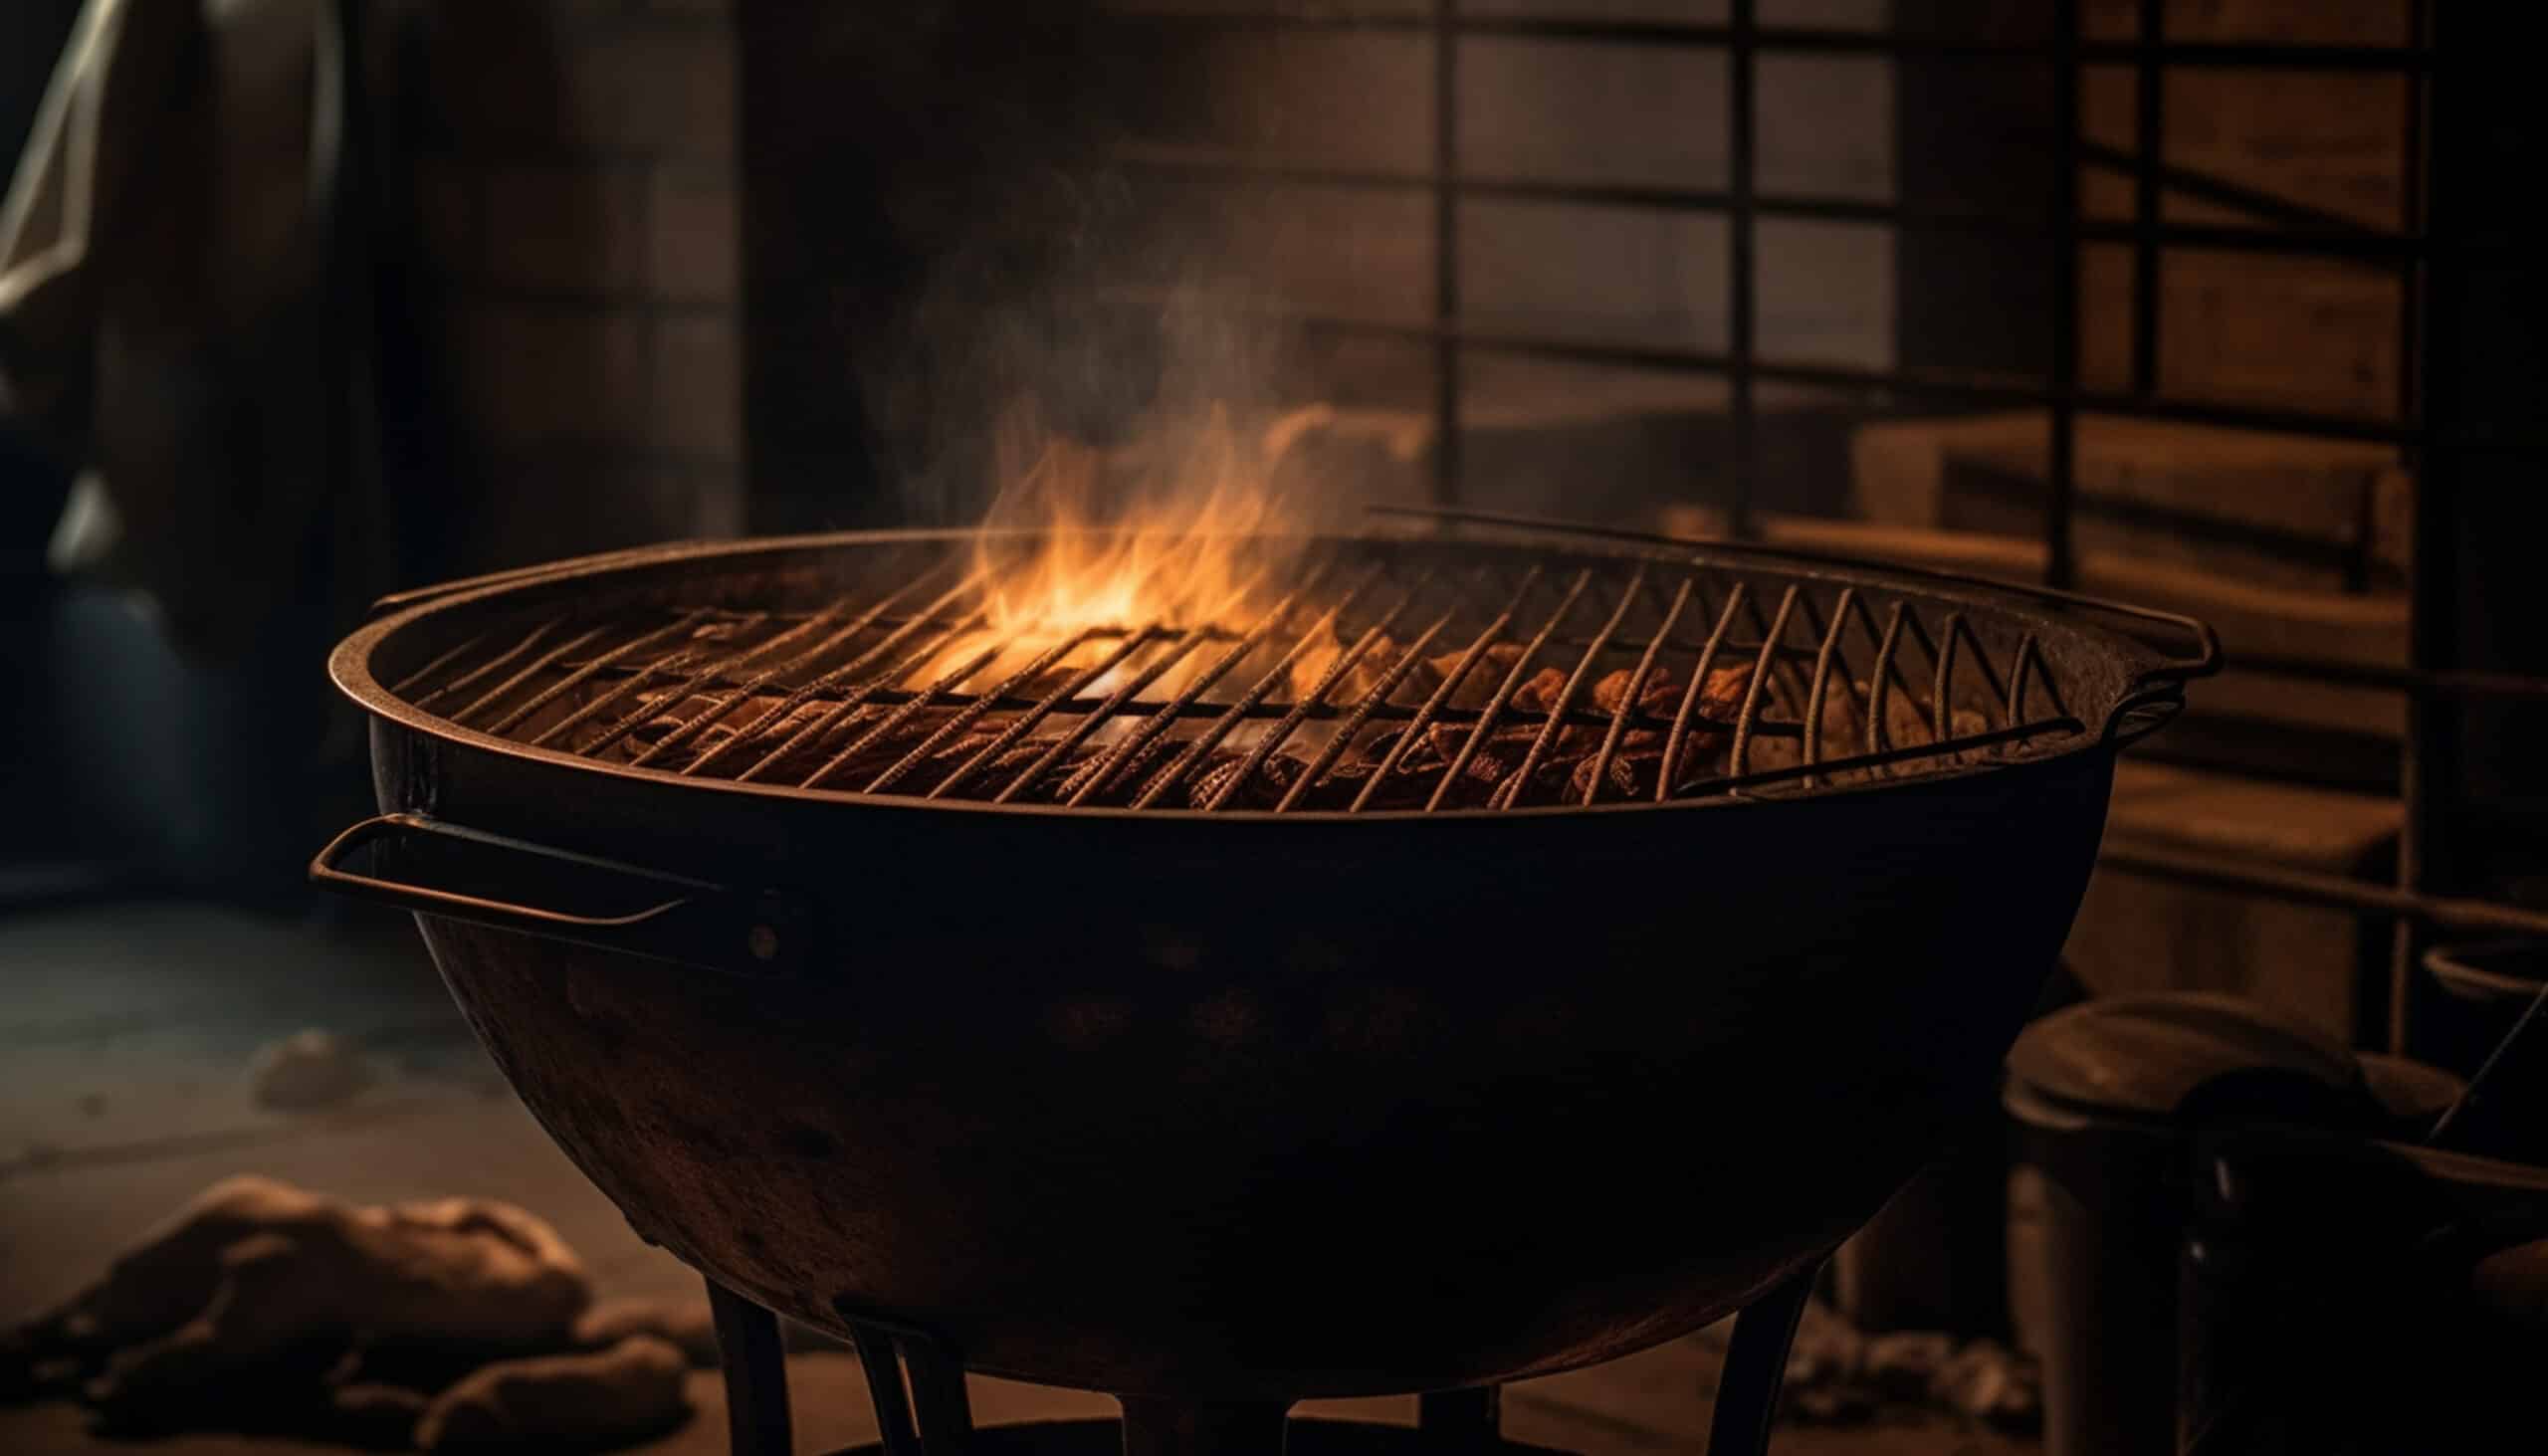 www.appr.com : Can You Use Wood In A Charcoal Grill?